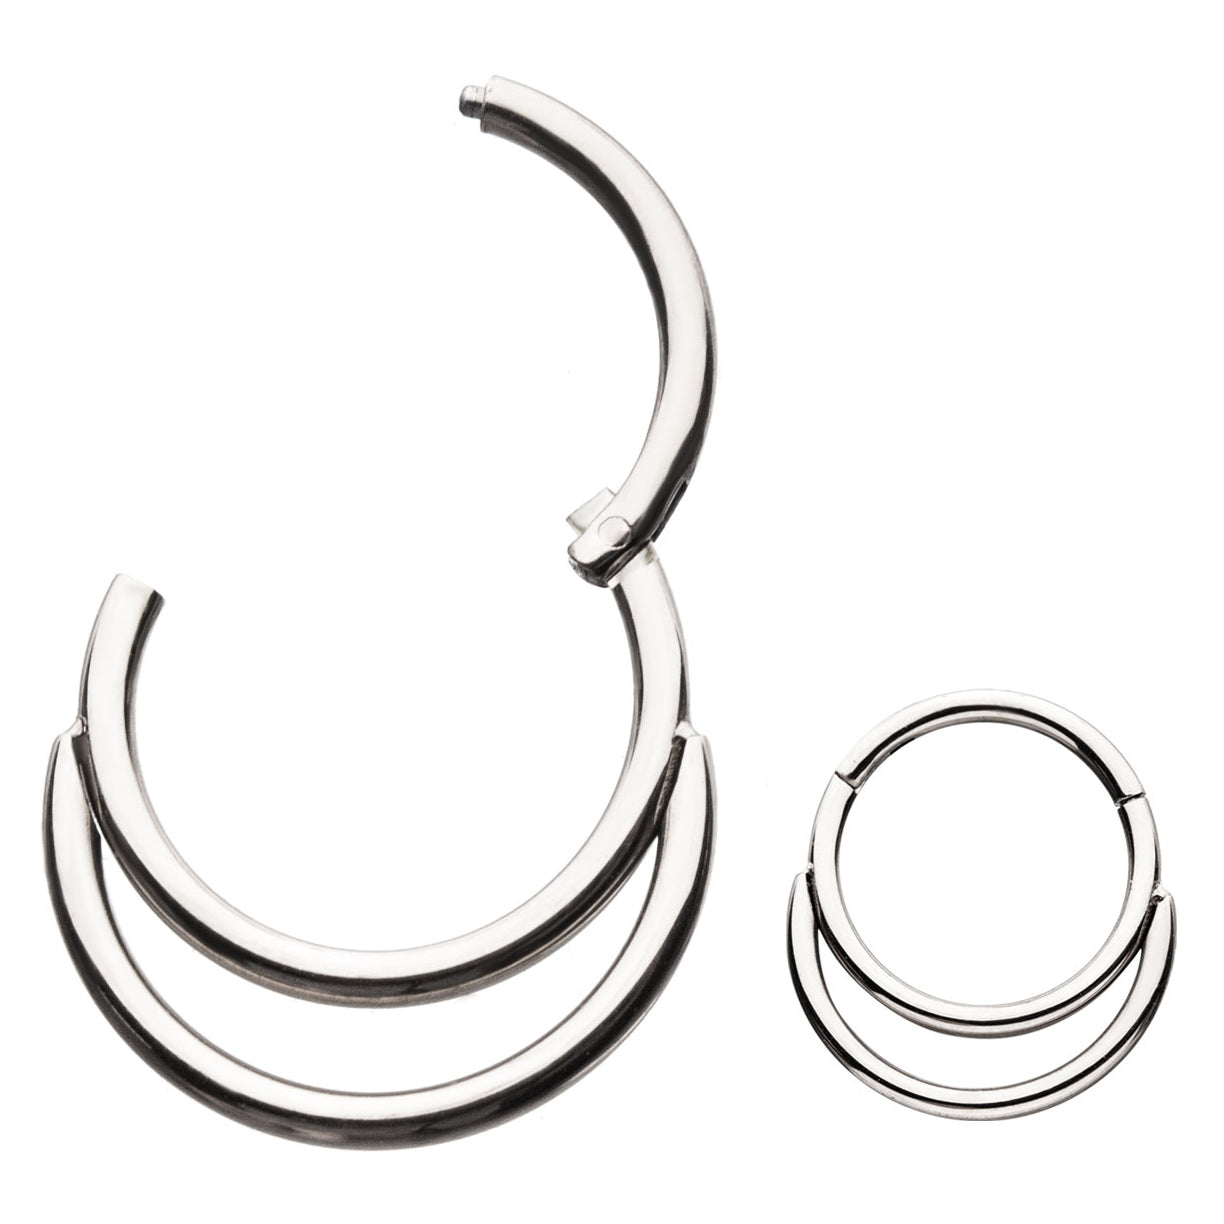 16g Double Stainless Hinged Segment Ring Hinged Rings 16g - 5/16